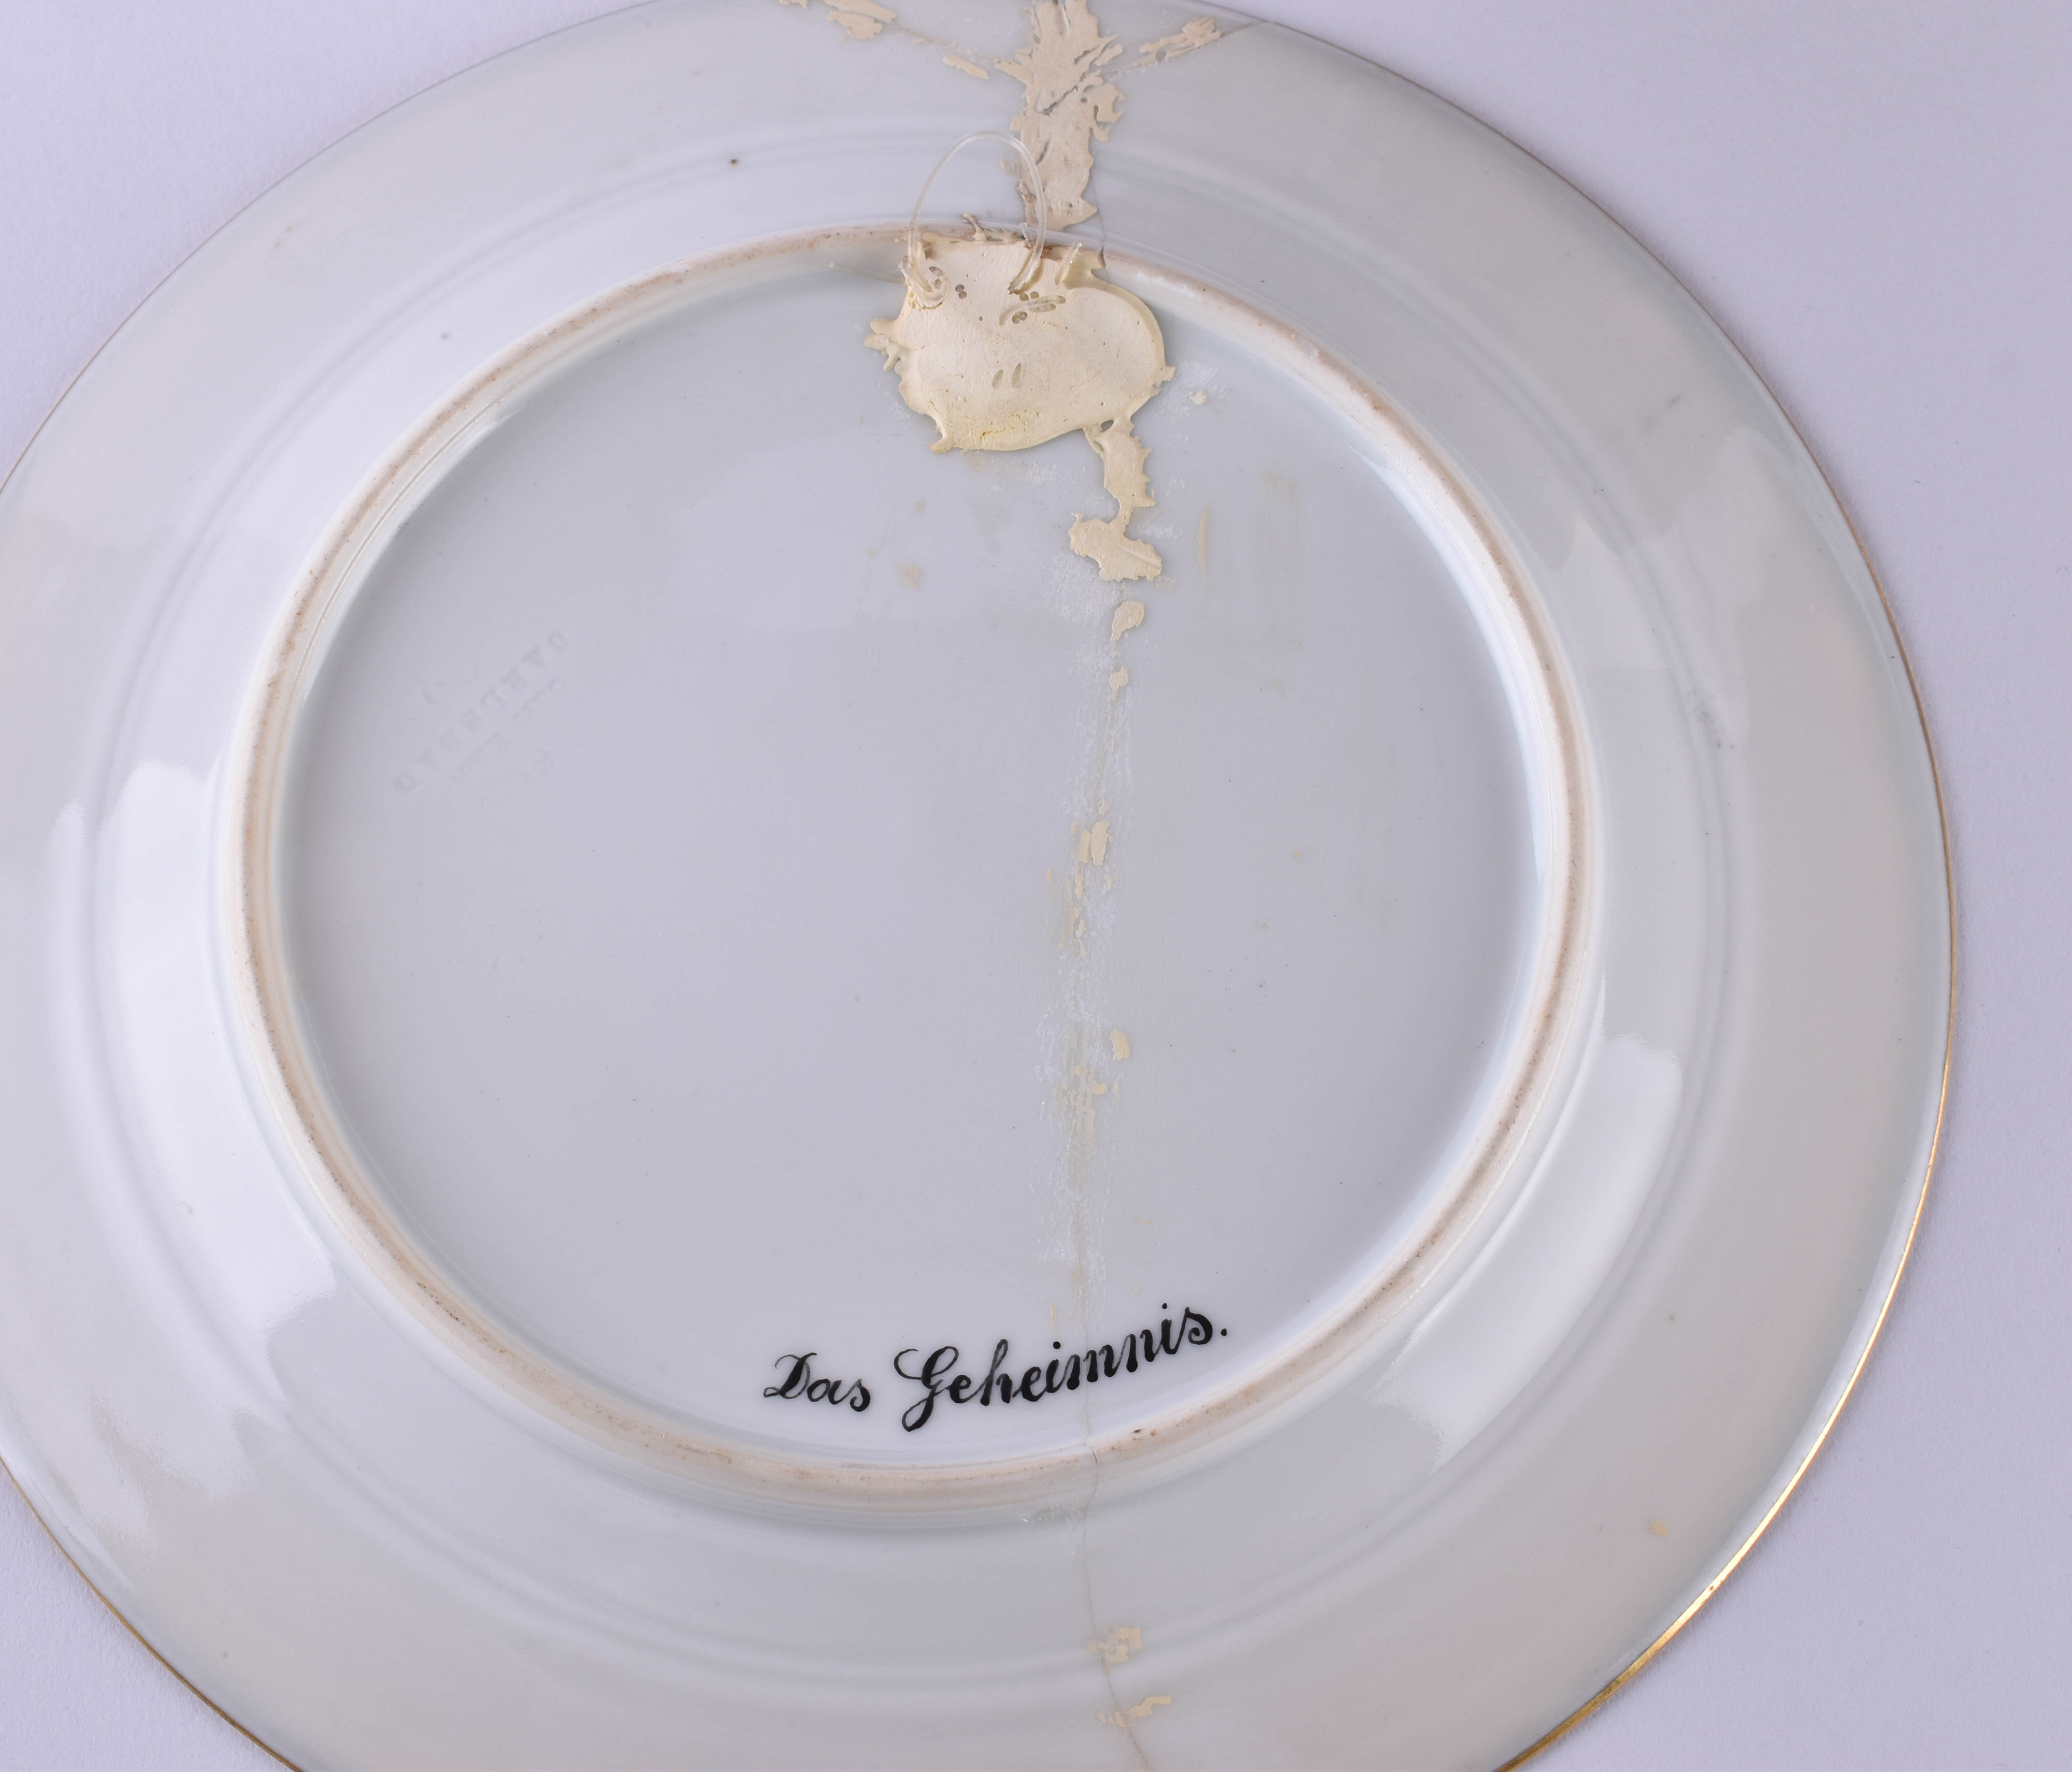 Carl Knoll Carlsbad, old Austria, pomp plate around 1890-1900 - Image 5 of 6